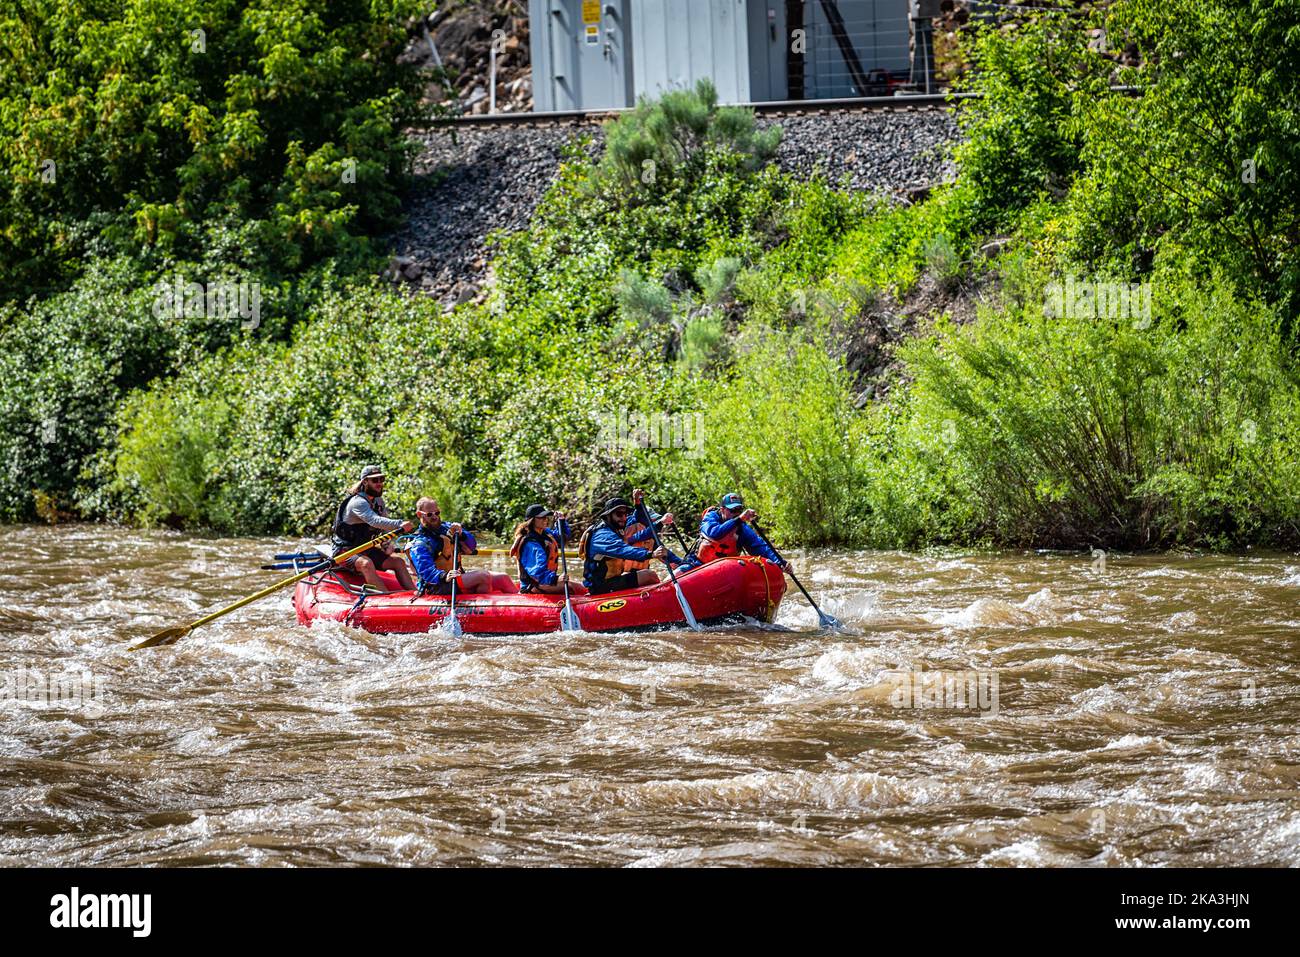 Glenwood Springs, USA - June 29, 2019: Group of candid people on boat in Colorado's Roaring Fork River white water rafting in summer season Stock Photo